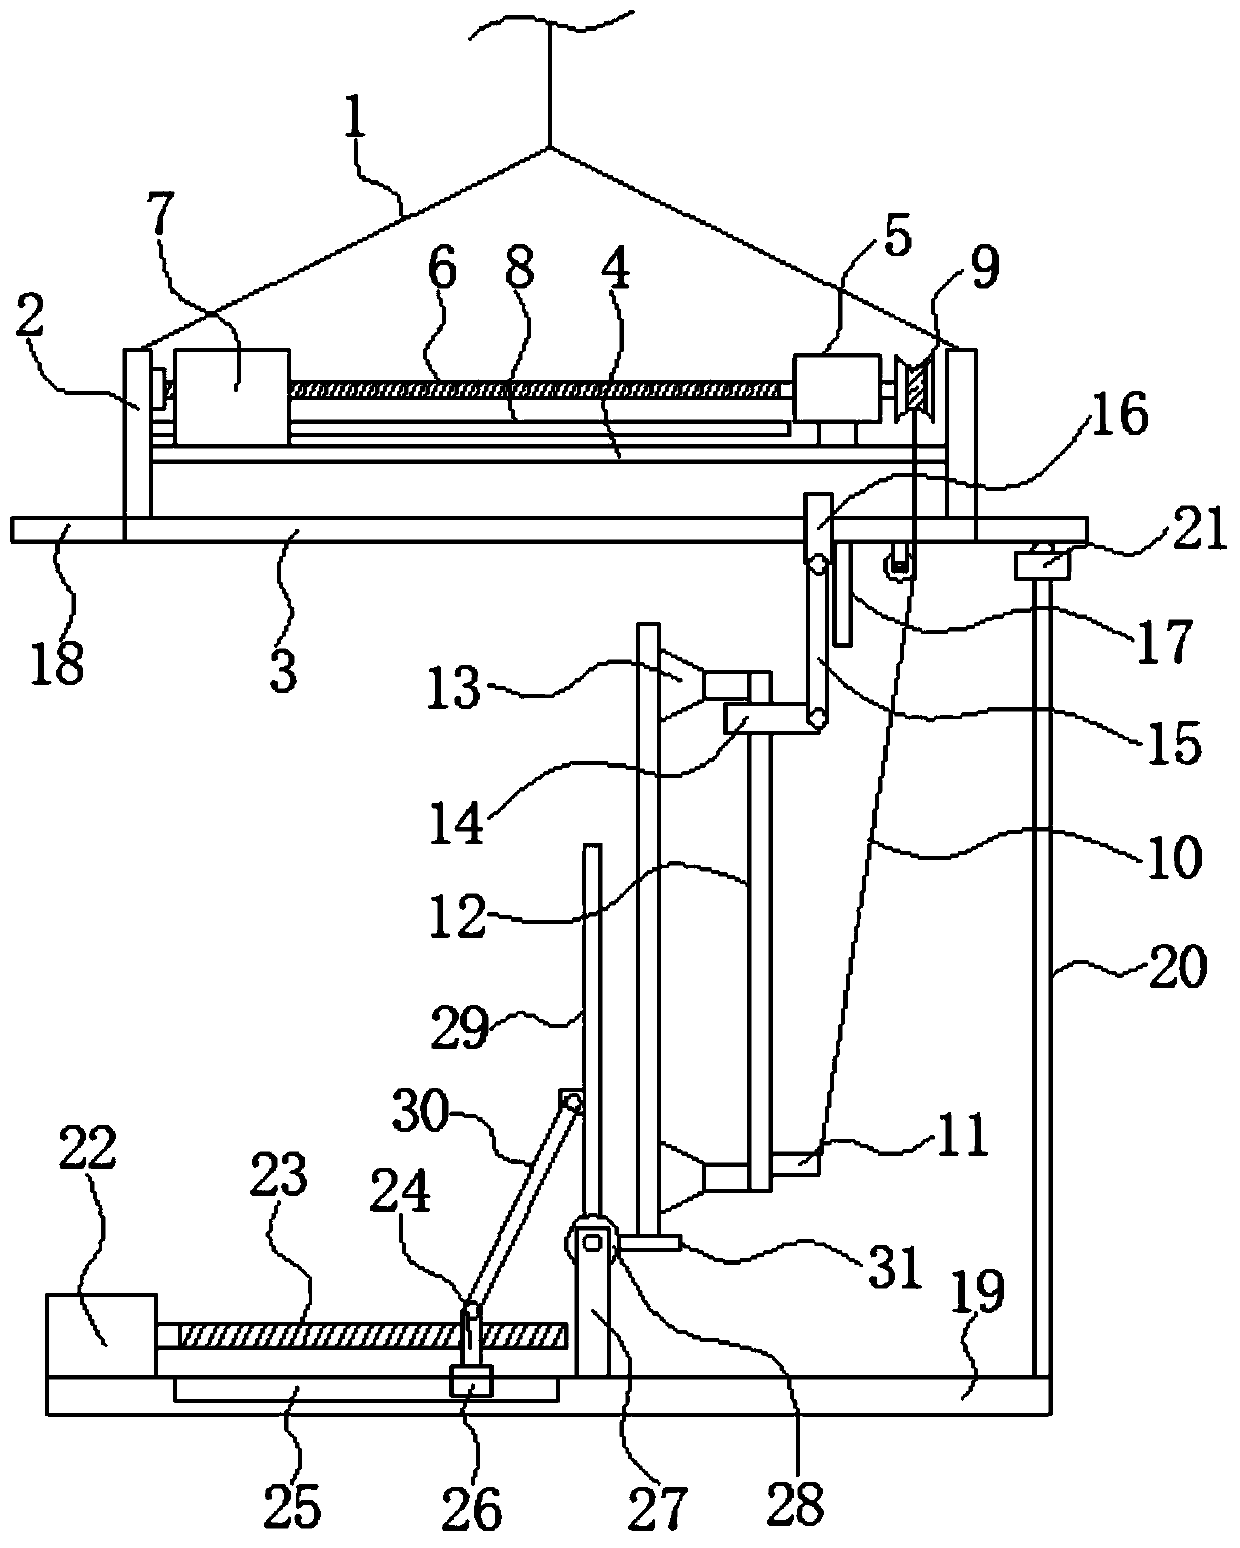 Hoisting device for mounting solar photovoltaic panel